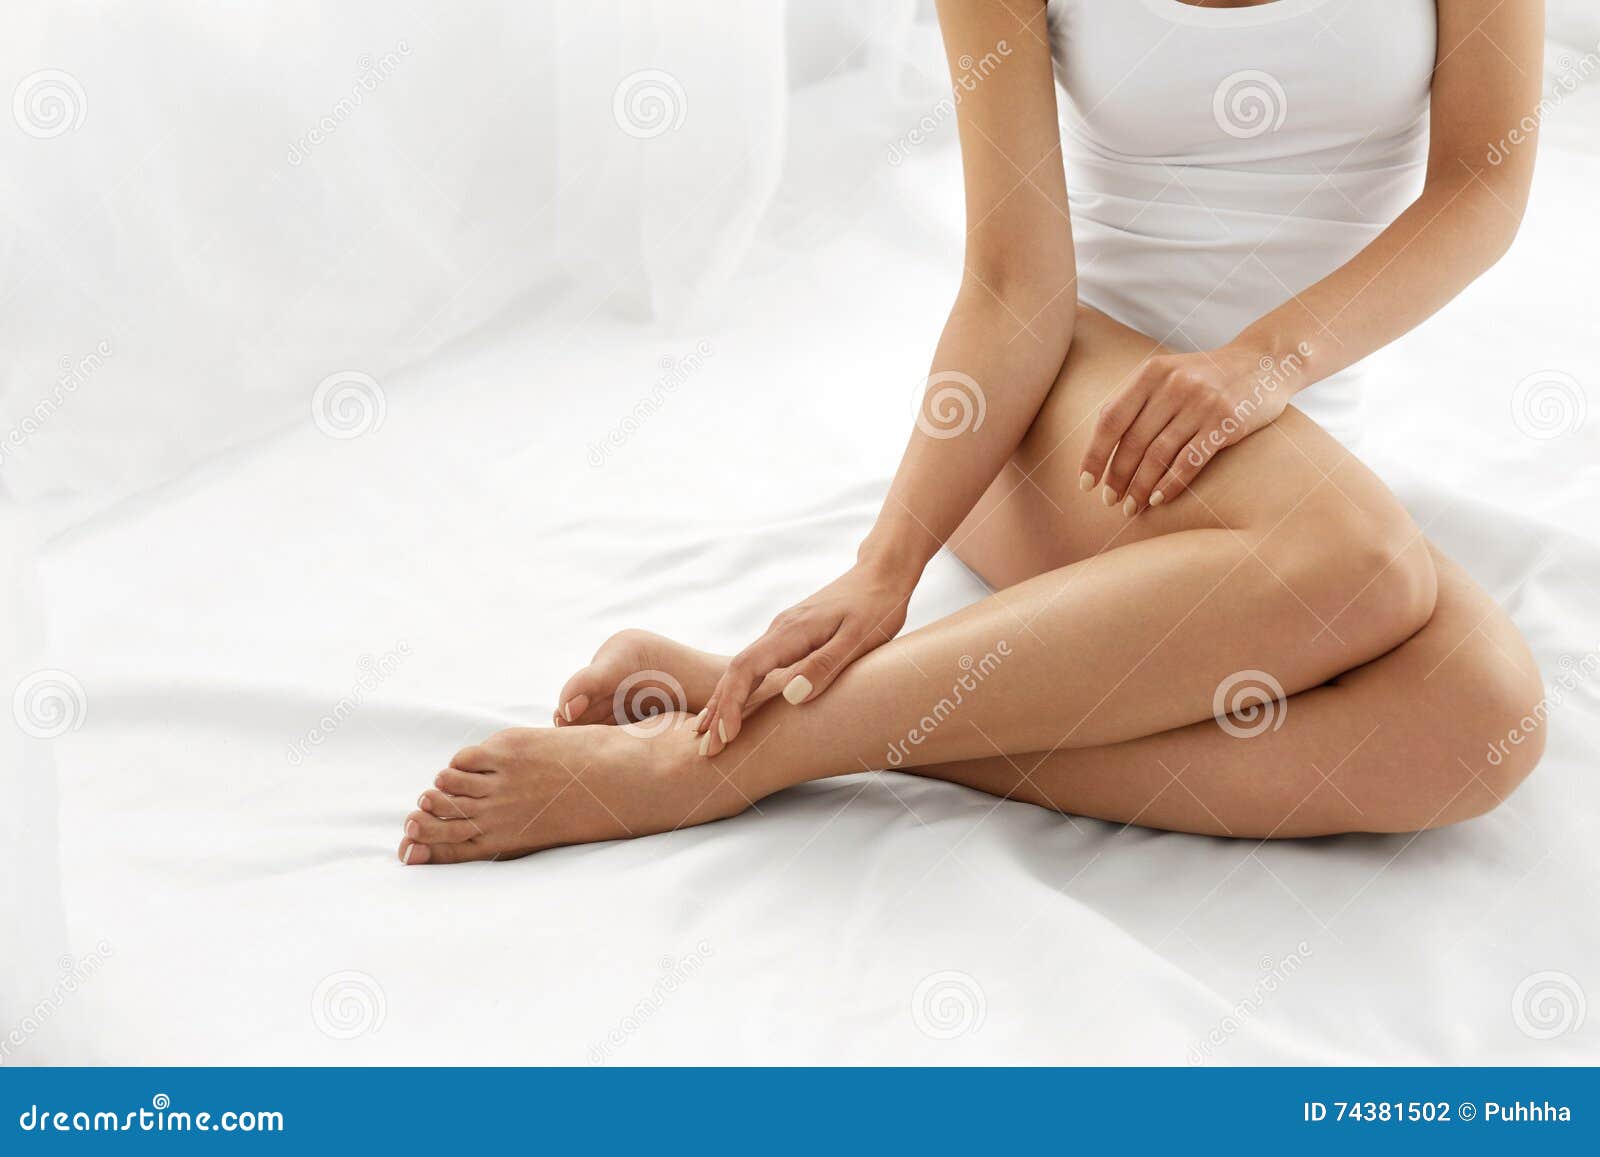 hair removal. close up woman hands touching long legs, soft skin